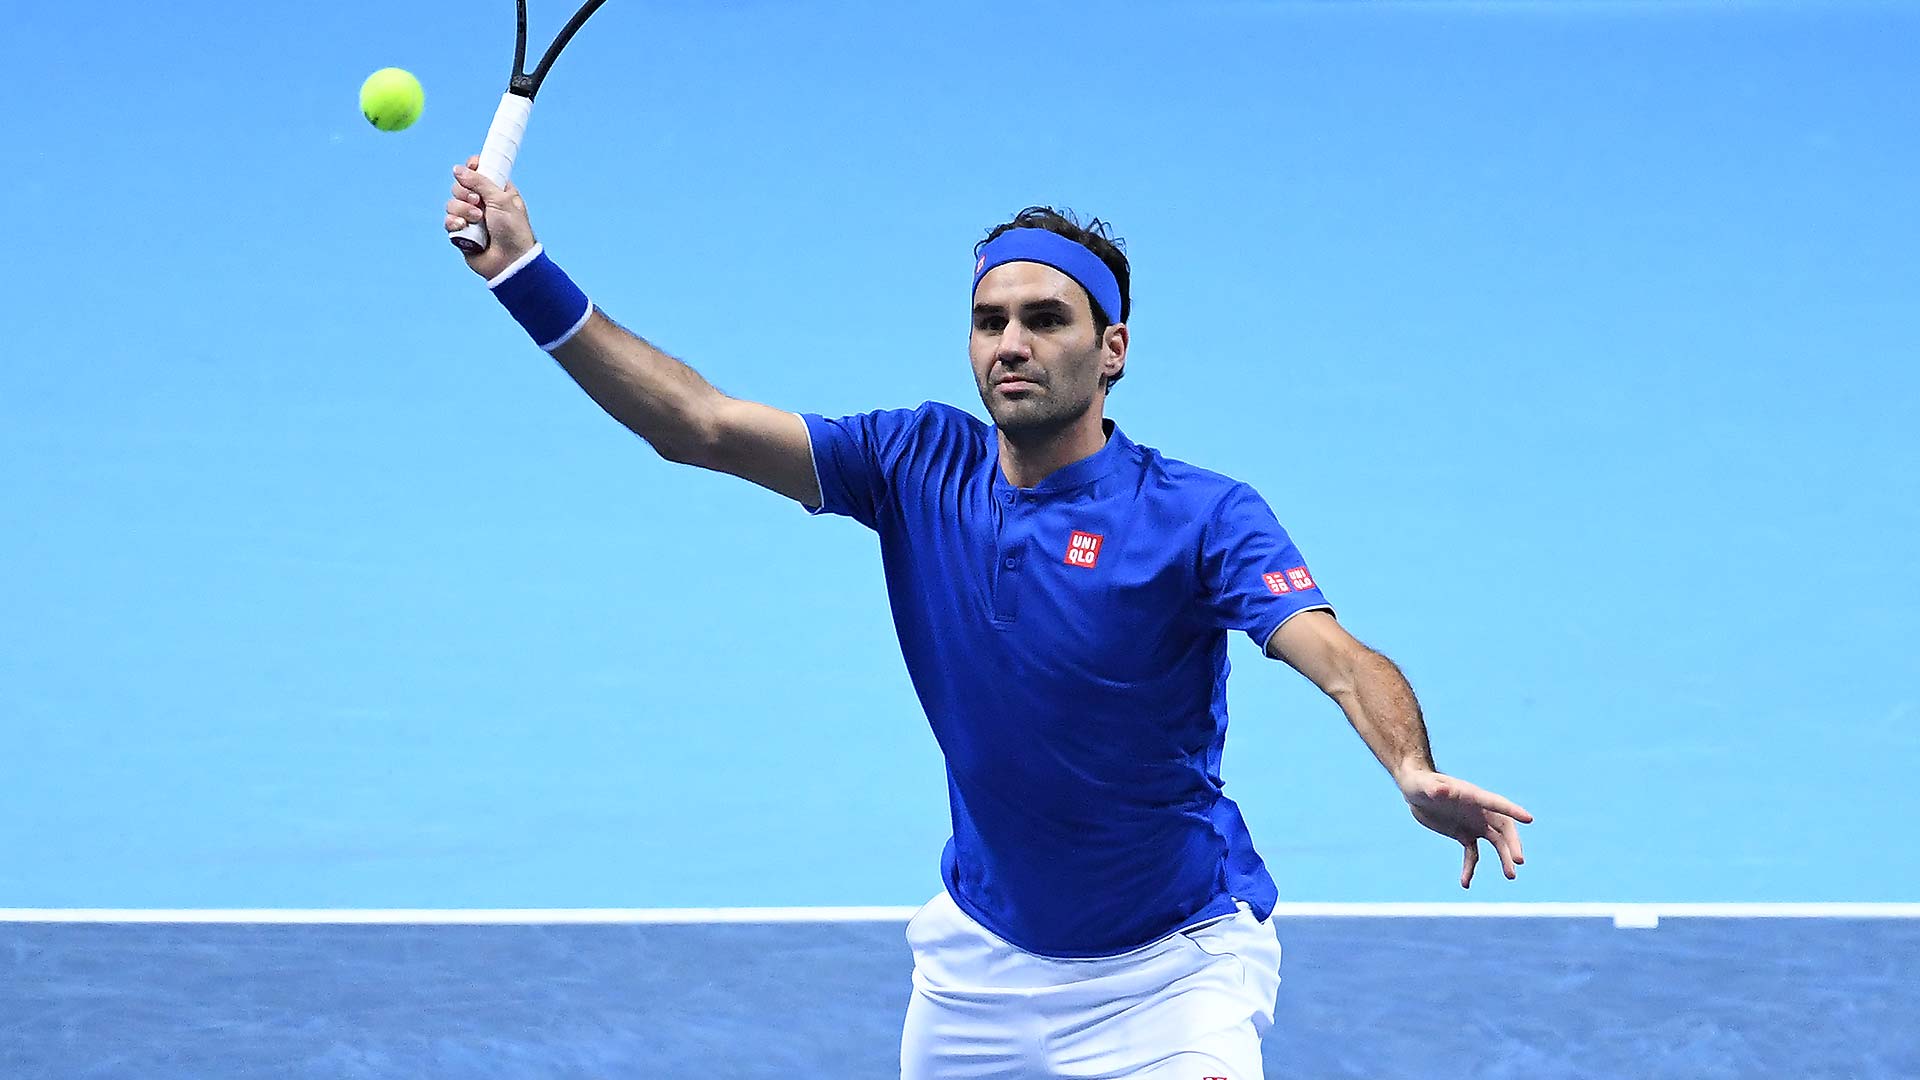 Federer Defeats Anderson Comprehensively, Books Spot in Semifinals